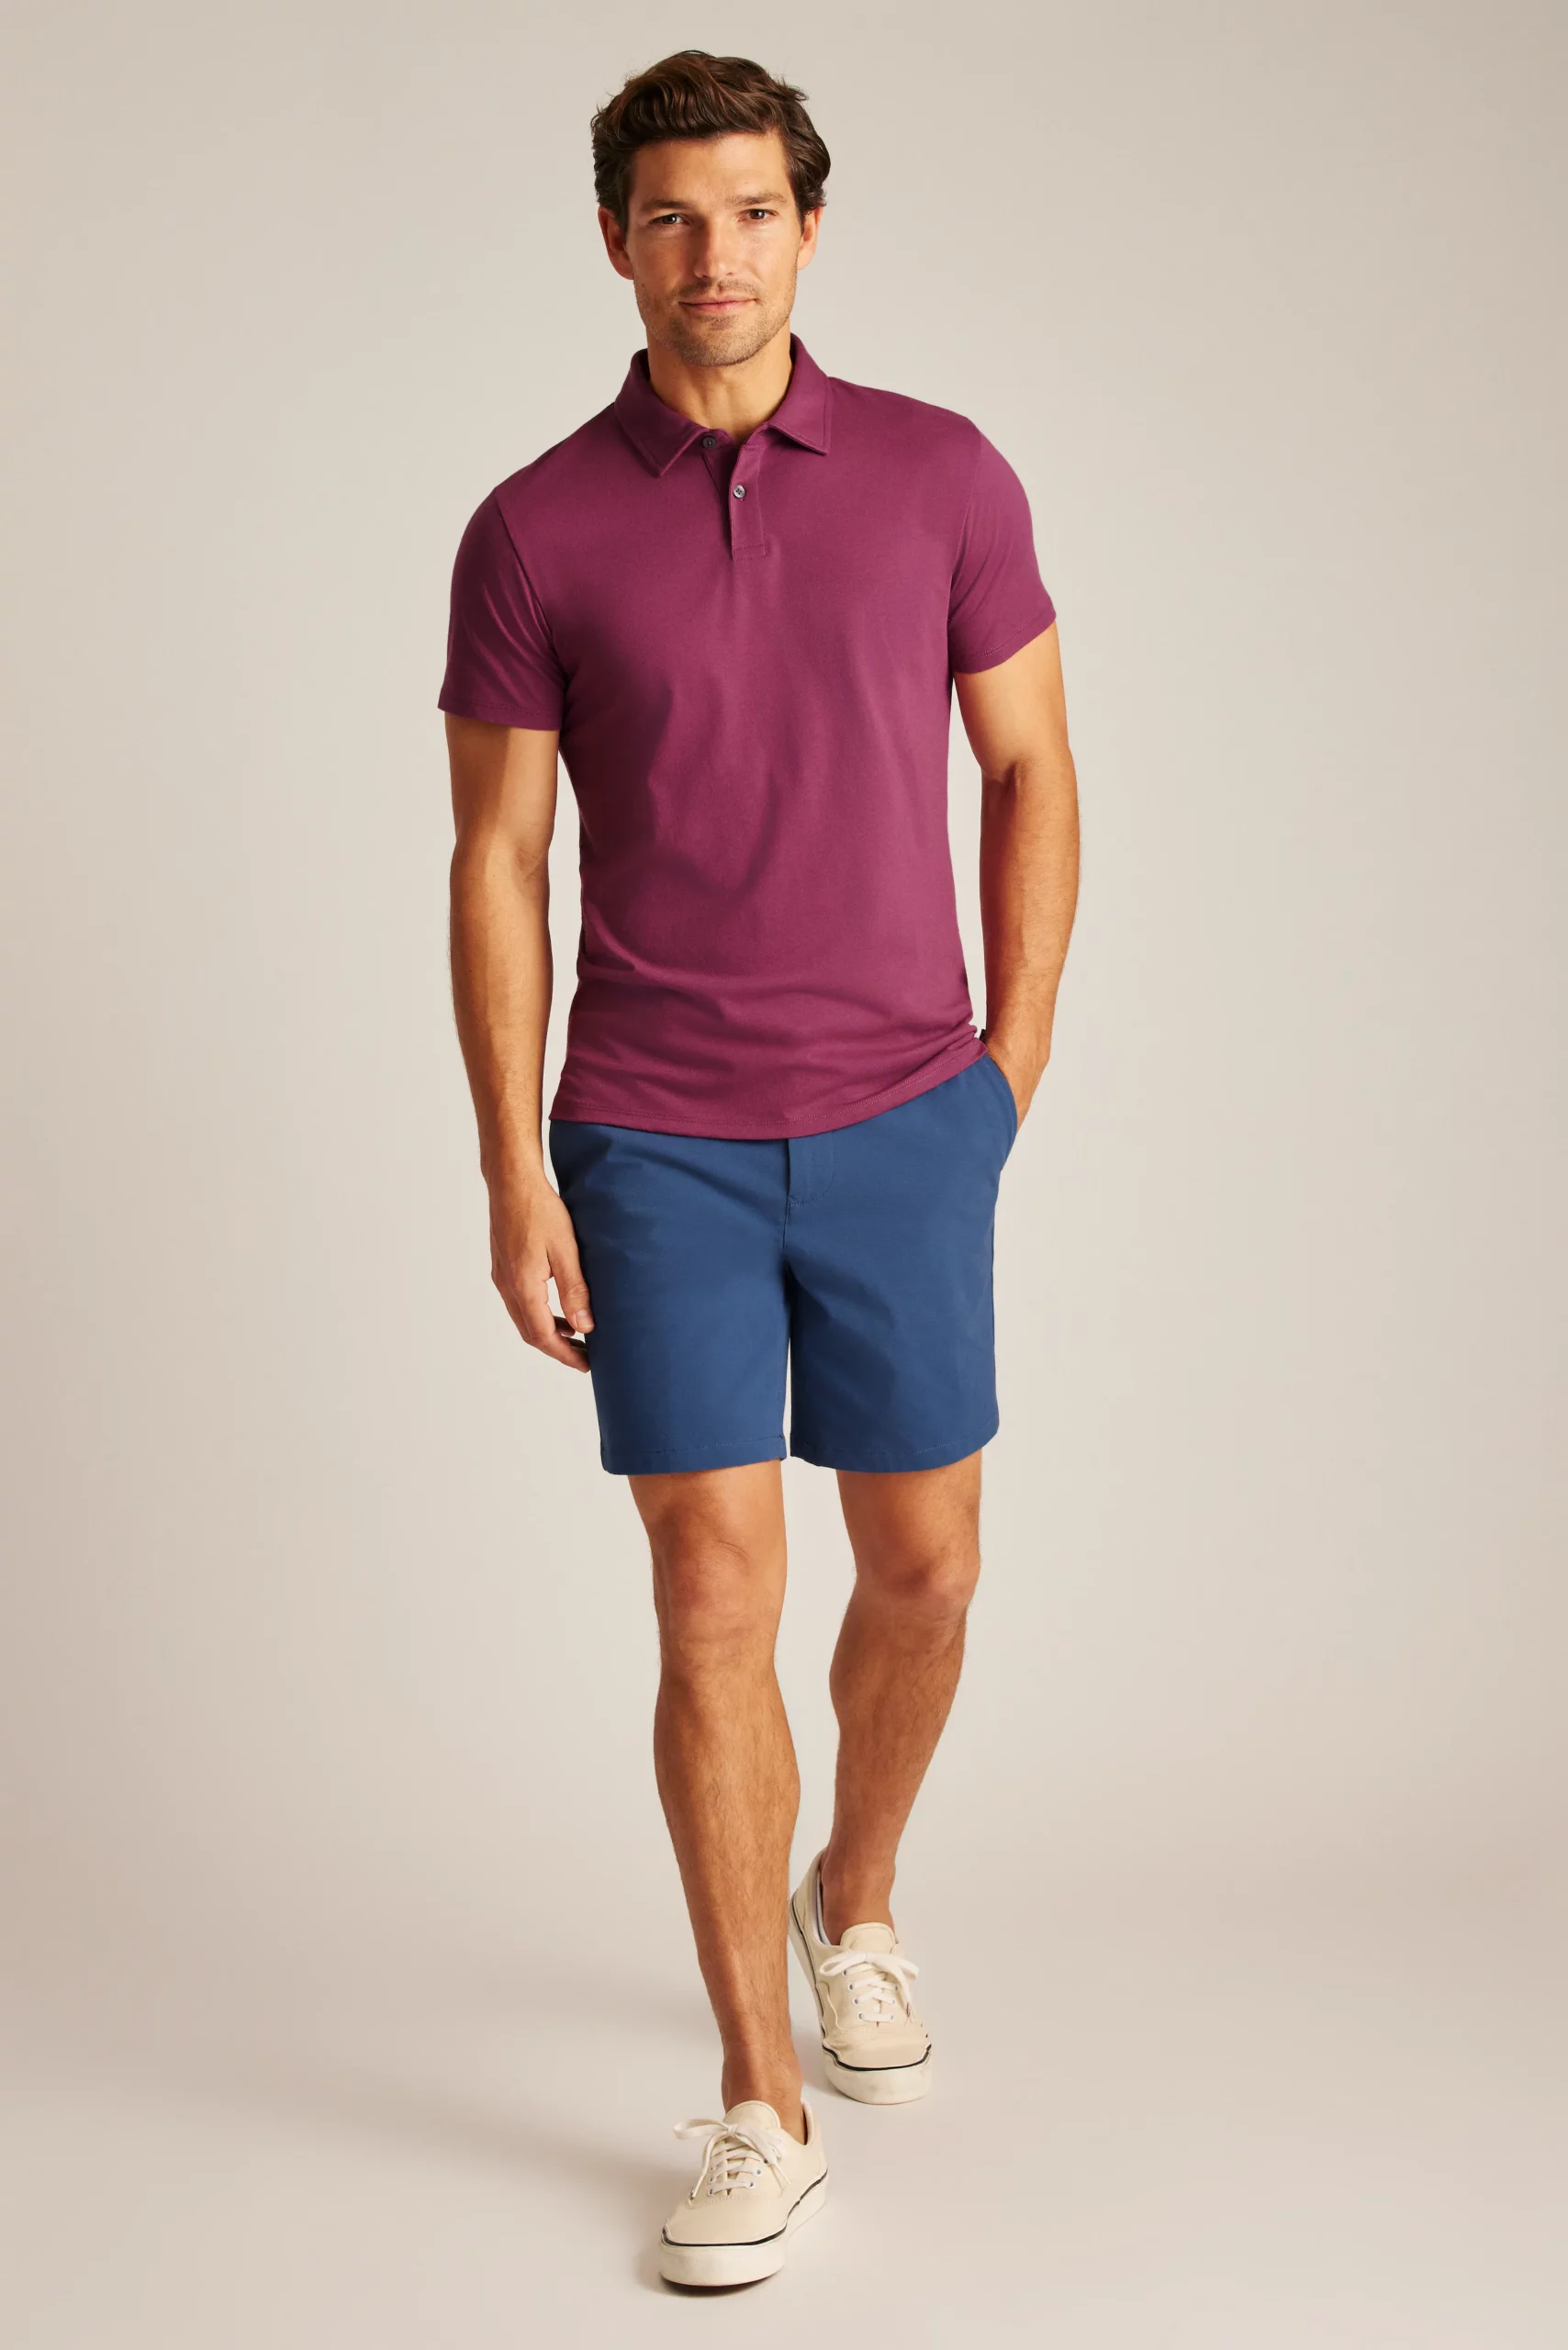 Man in Jetsetter Performance Polo from Bonobos in maroon and blue shorts 